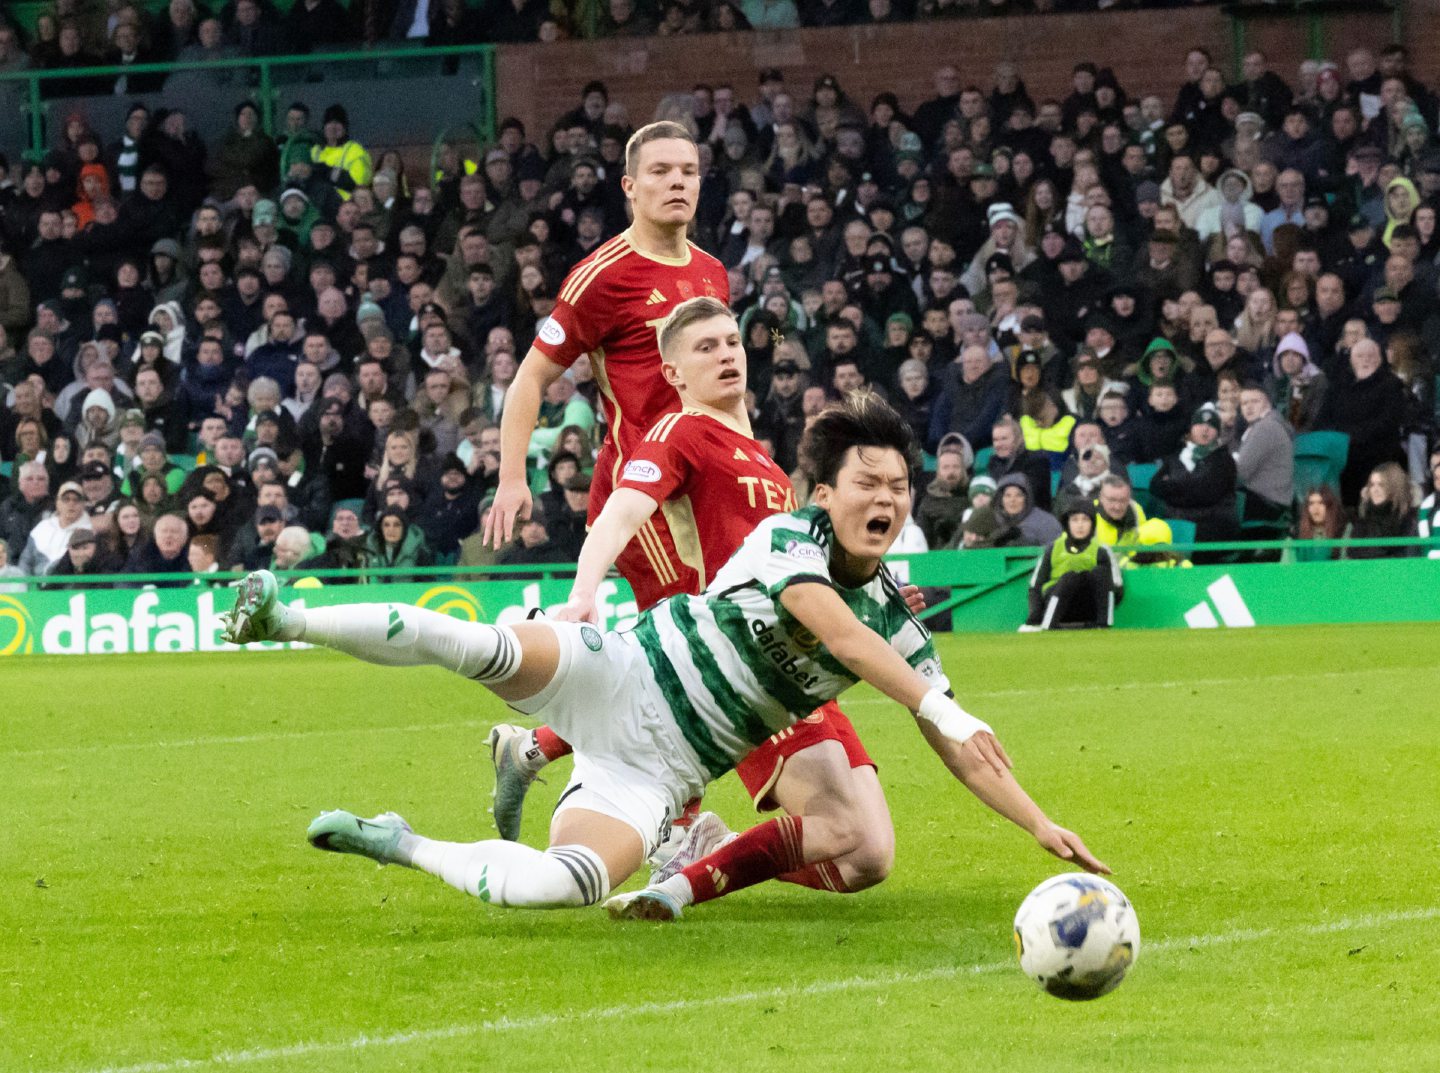 Celtic's Oh Hyeon-Gyu is taken down in the box by Aberdeen's Jack MacKenzie.